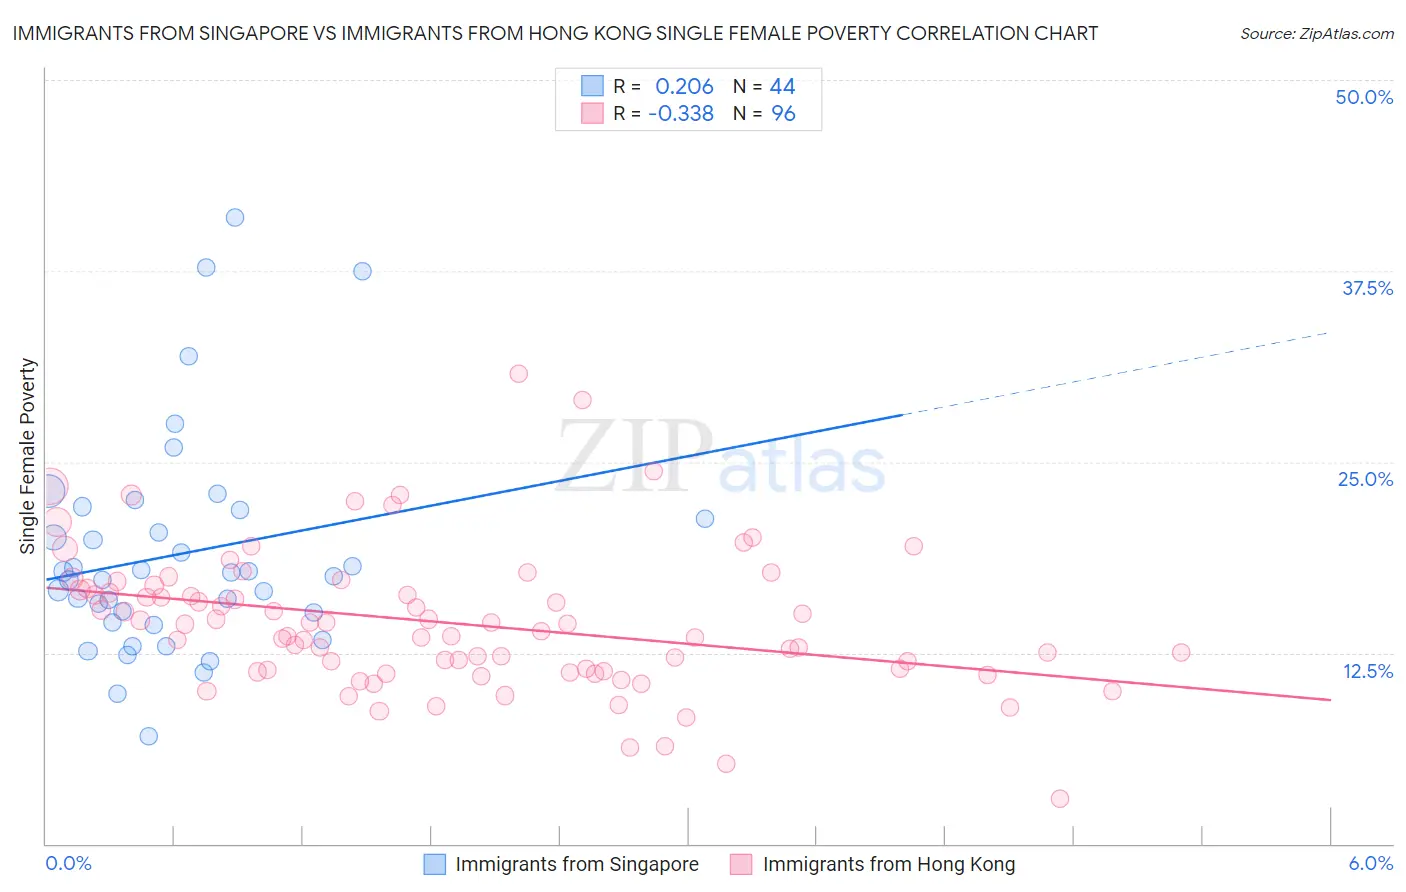 Immigrants from Singapore vs Immigrants from Hong Kong Single Female Poverty